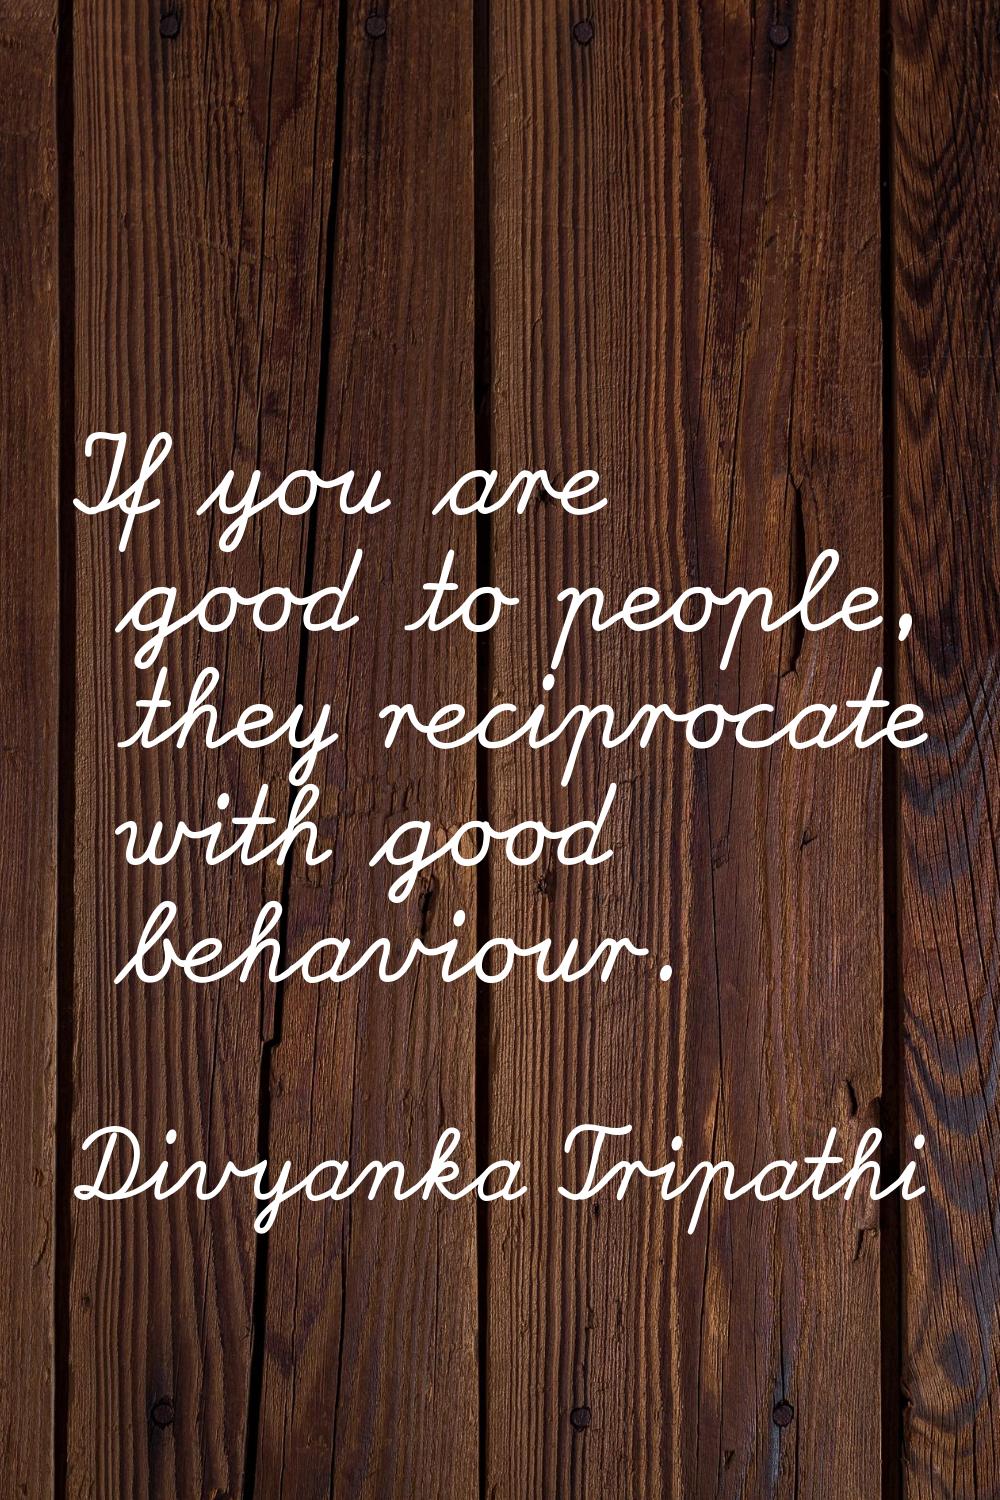 If you are good to people, they reciprocate with good behaviour.